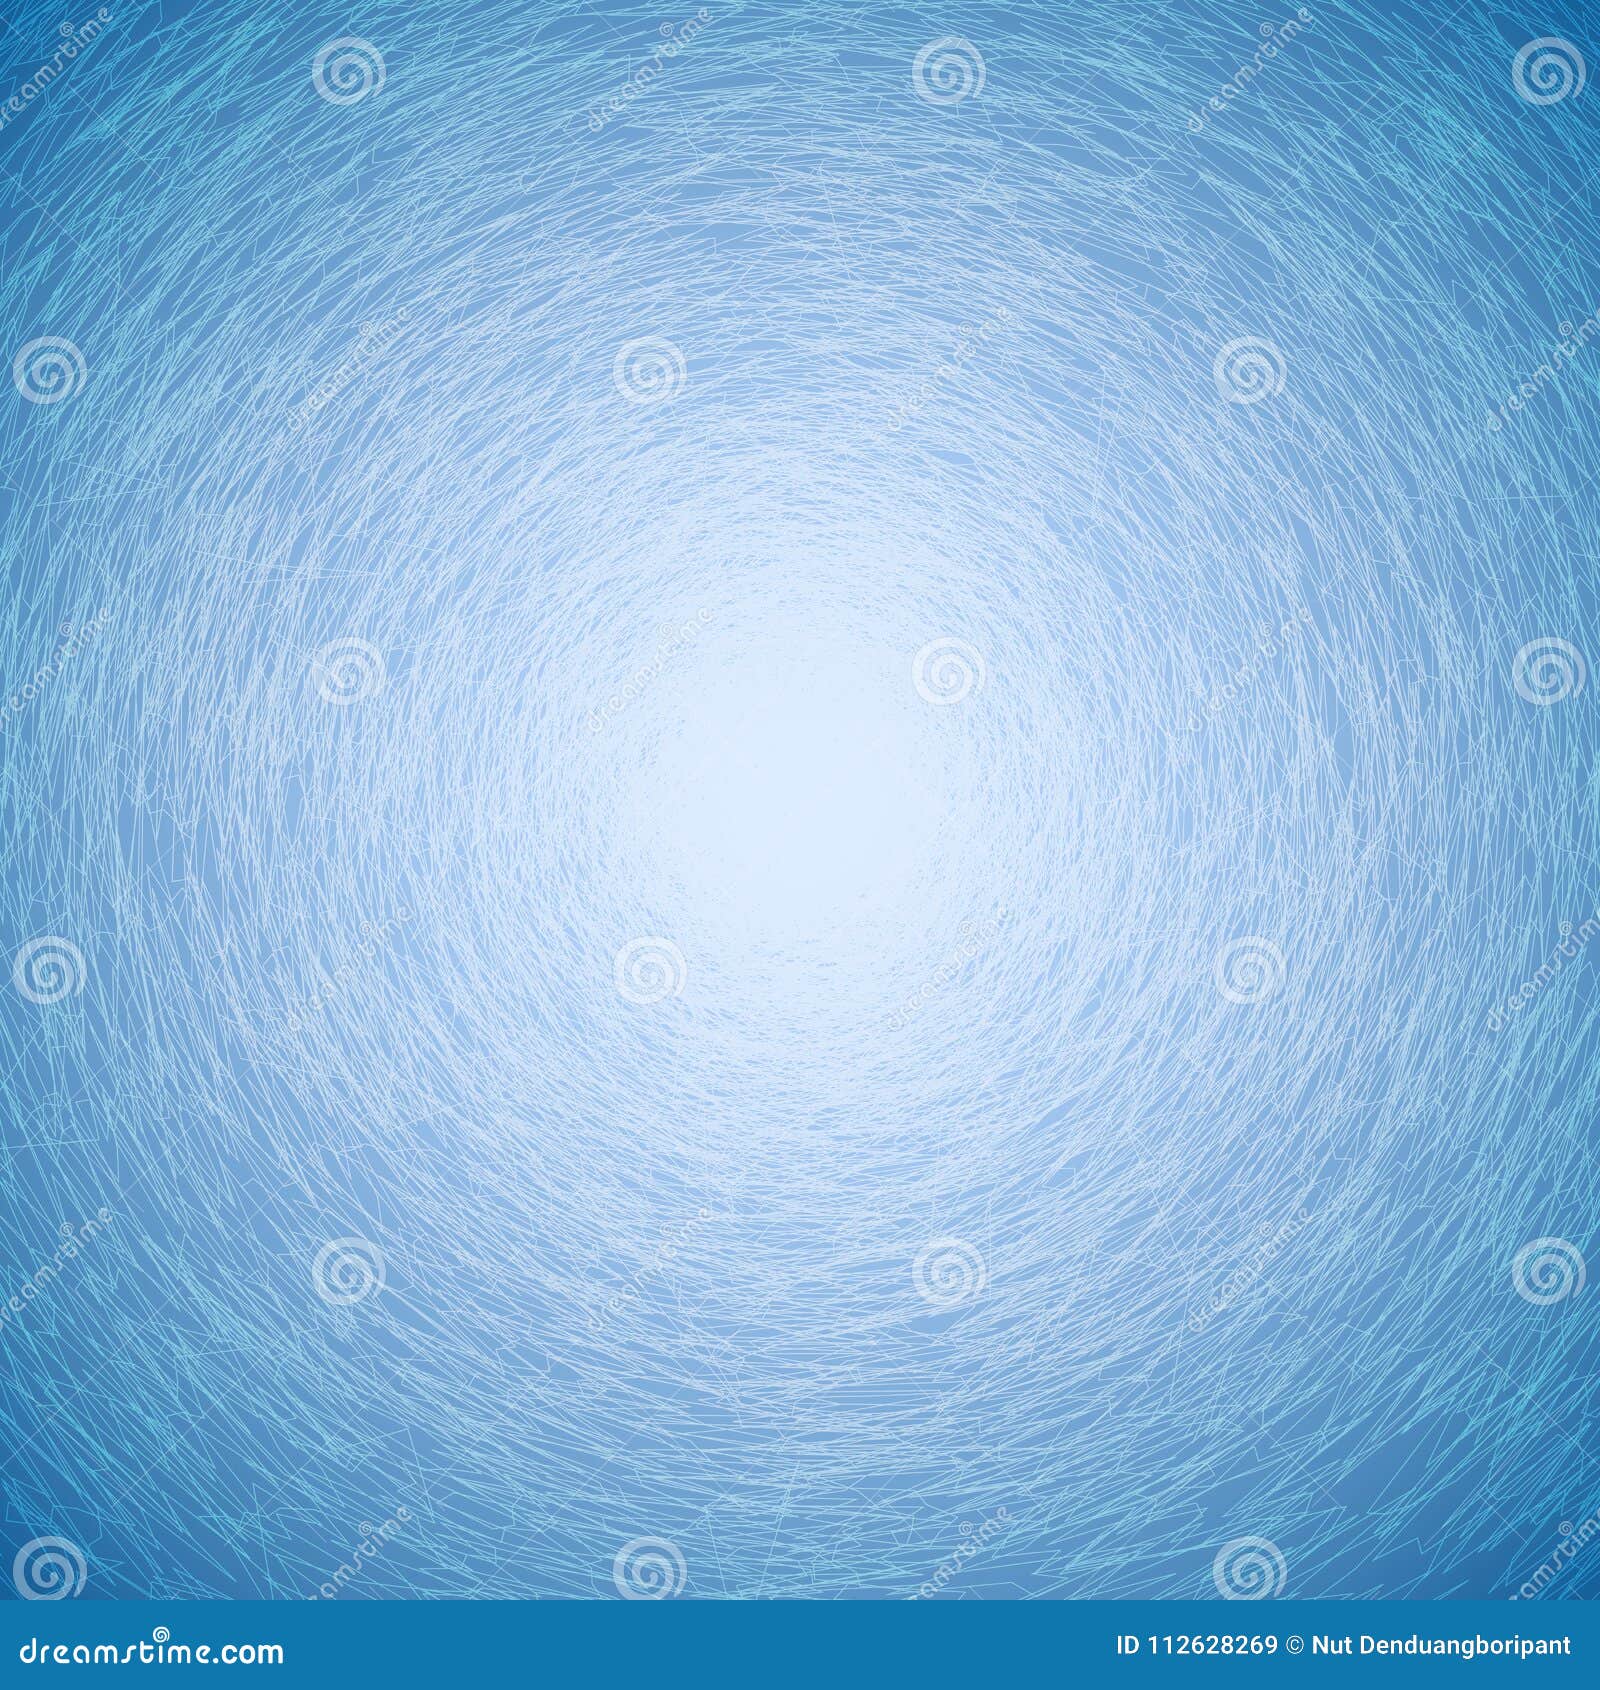 Whirlpool Vortex Abstract Background Stock Vector - Illustration of ...